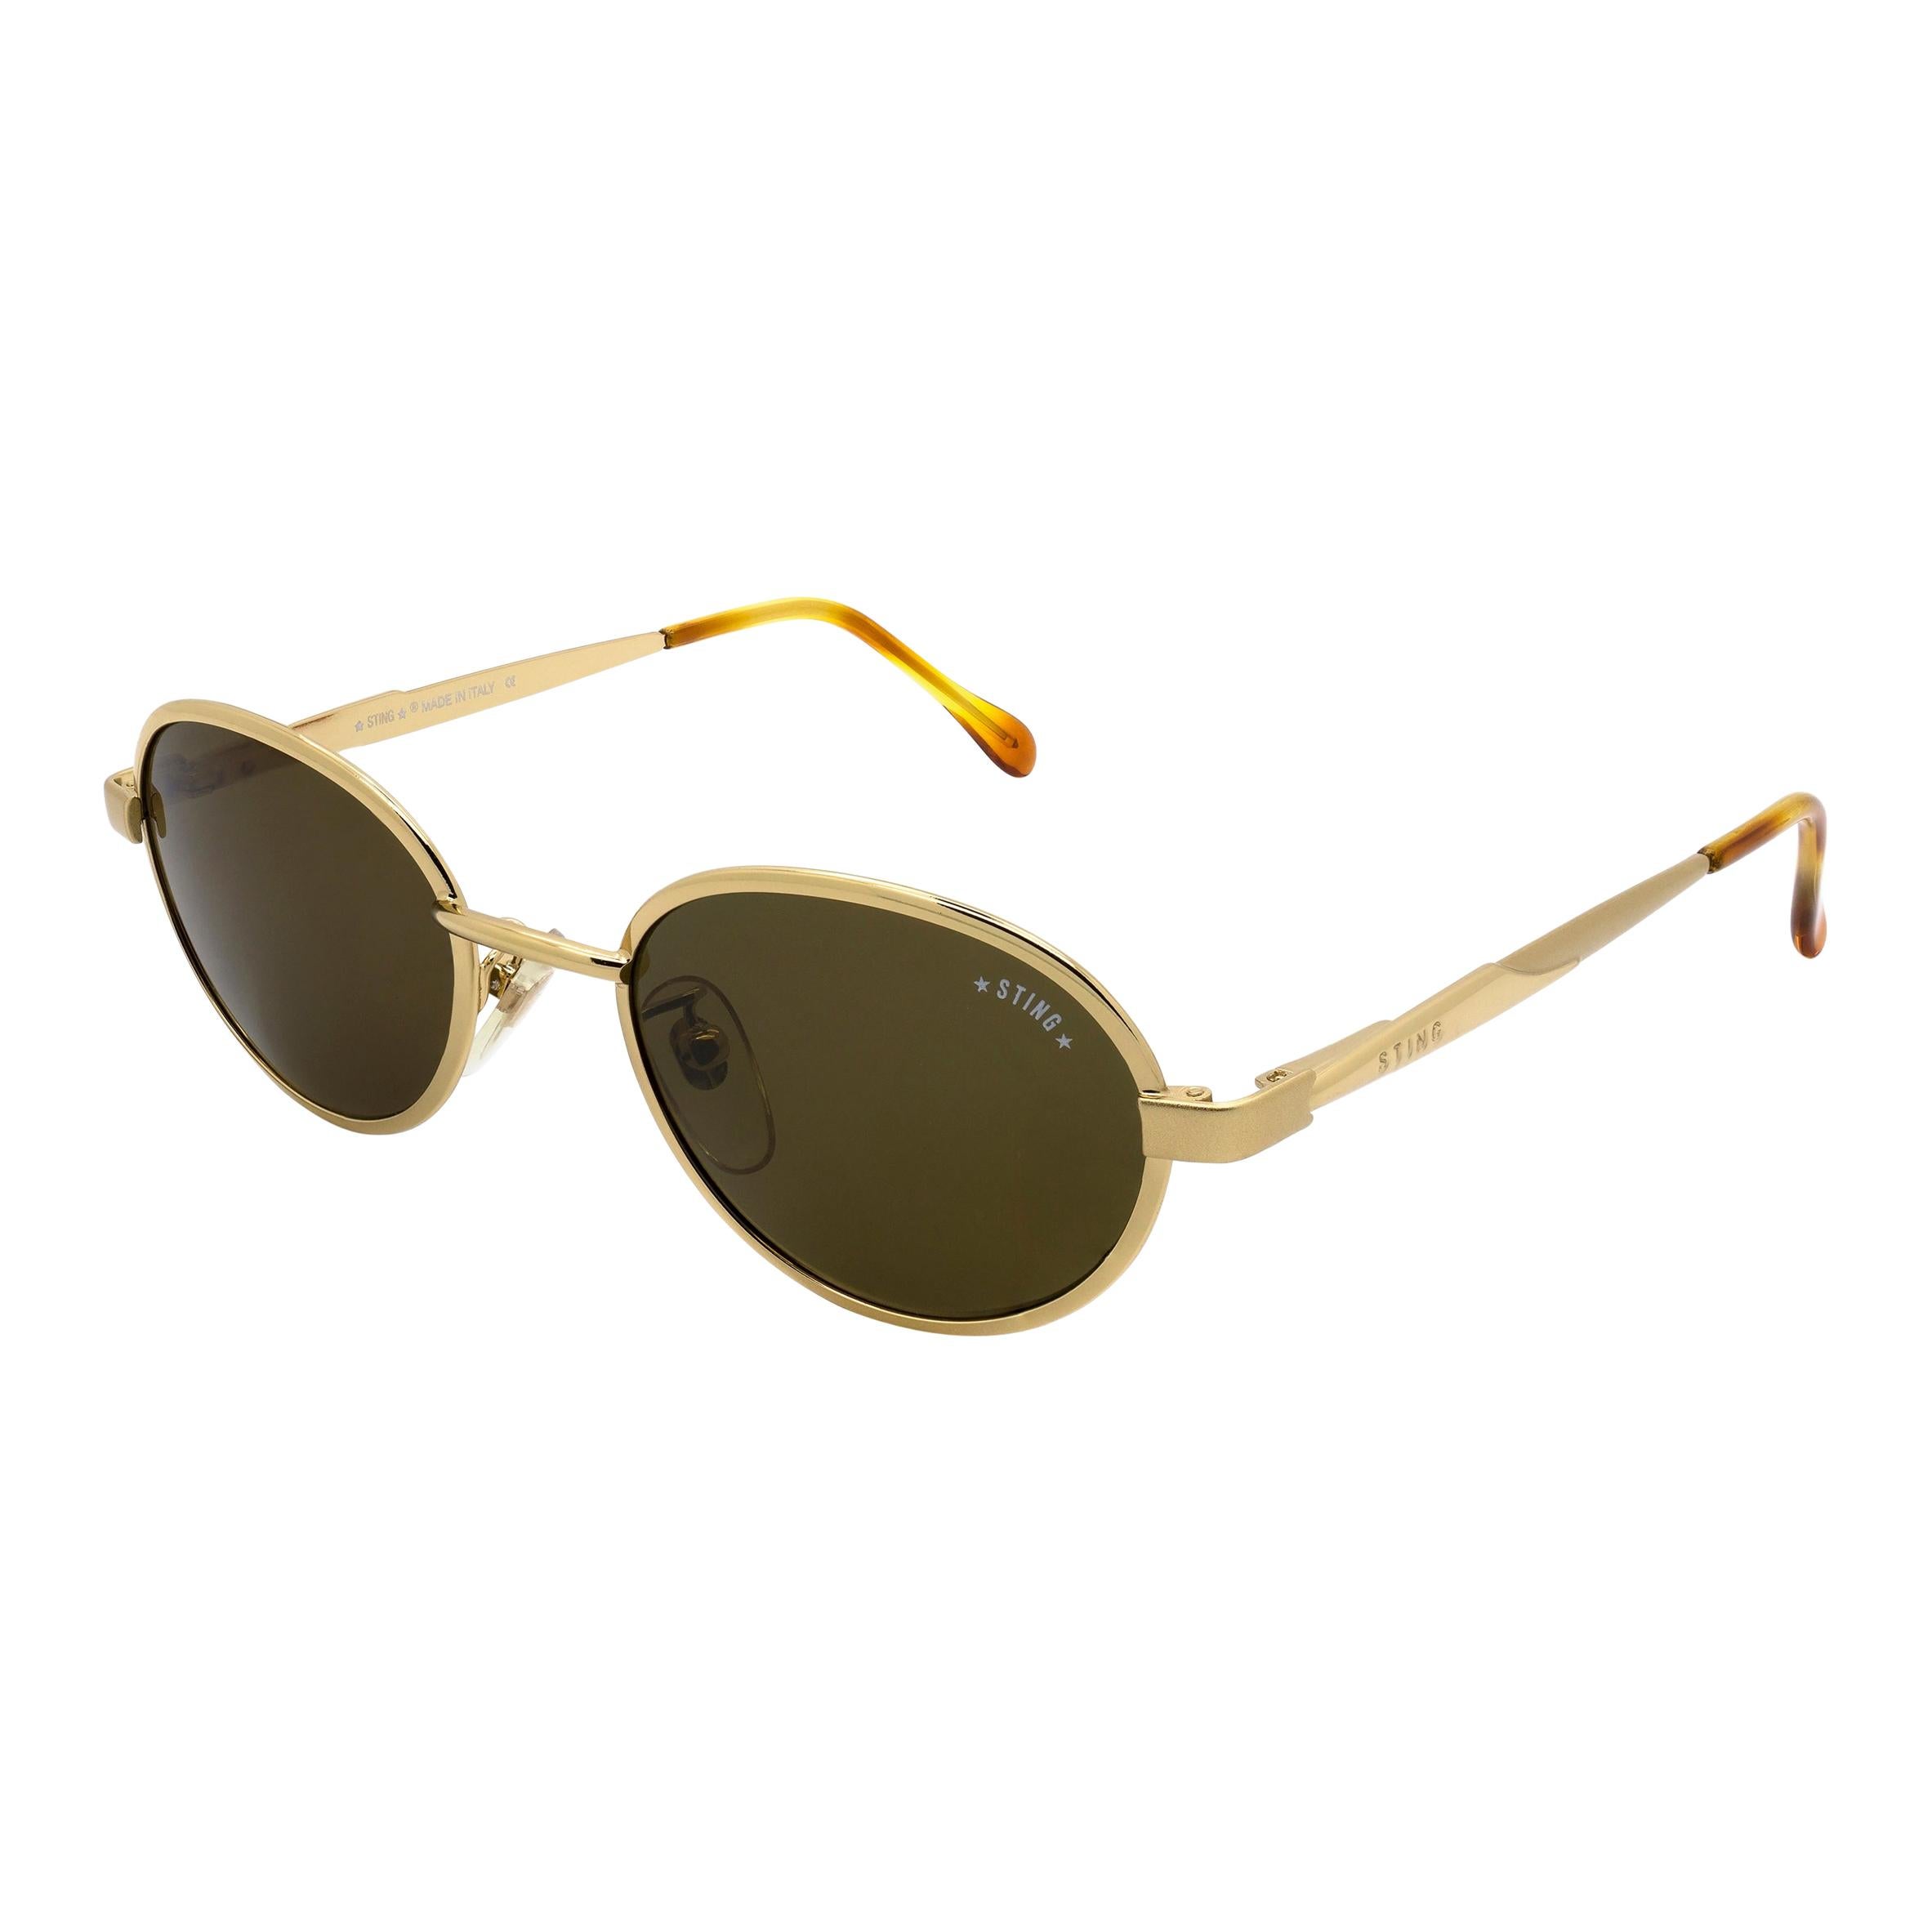 Round gold sunglasses by Sting, Italy 